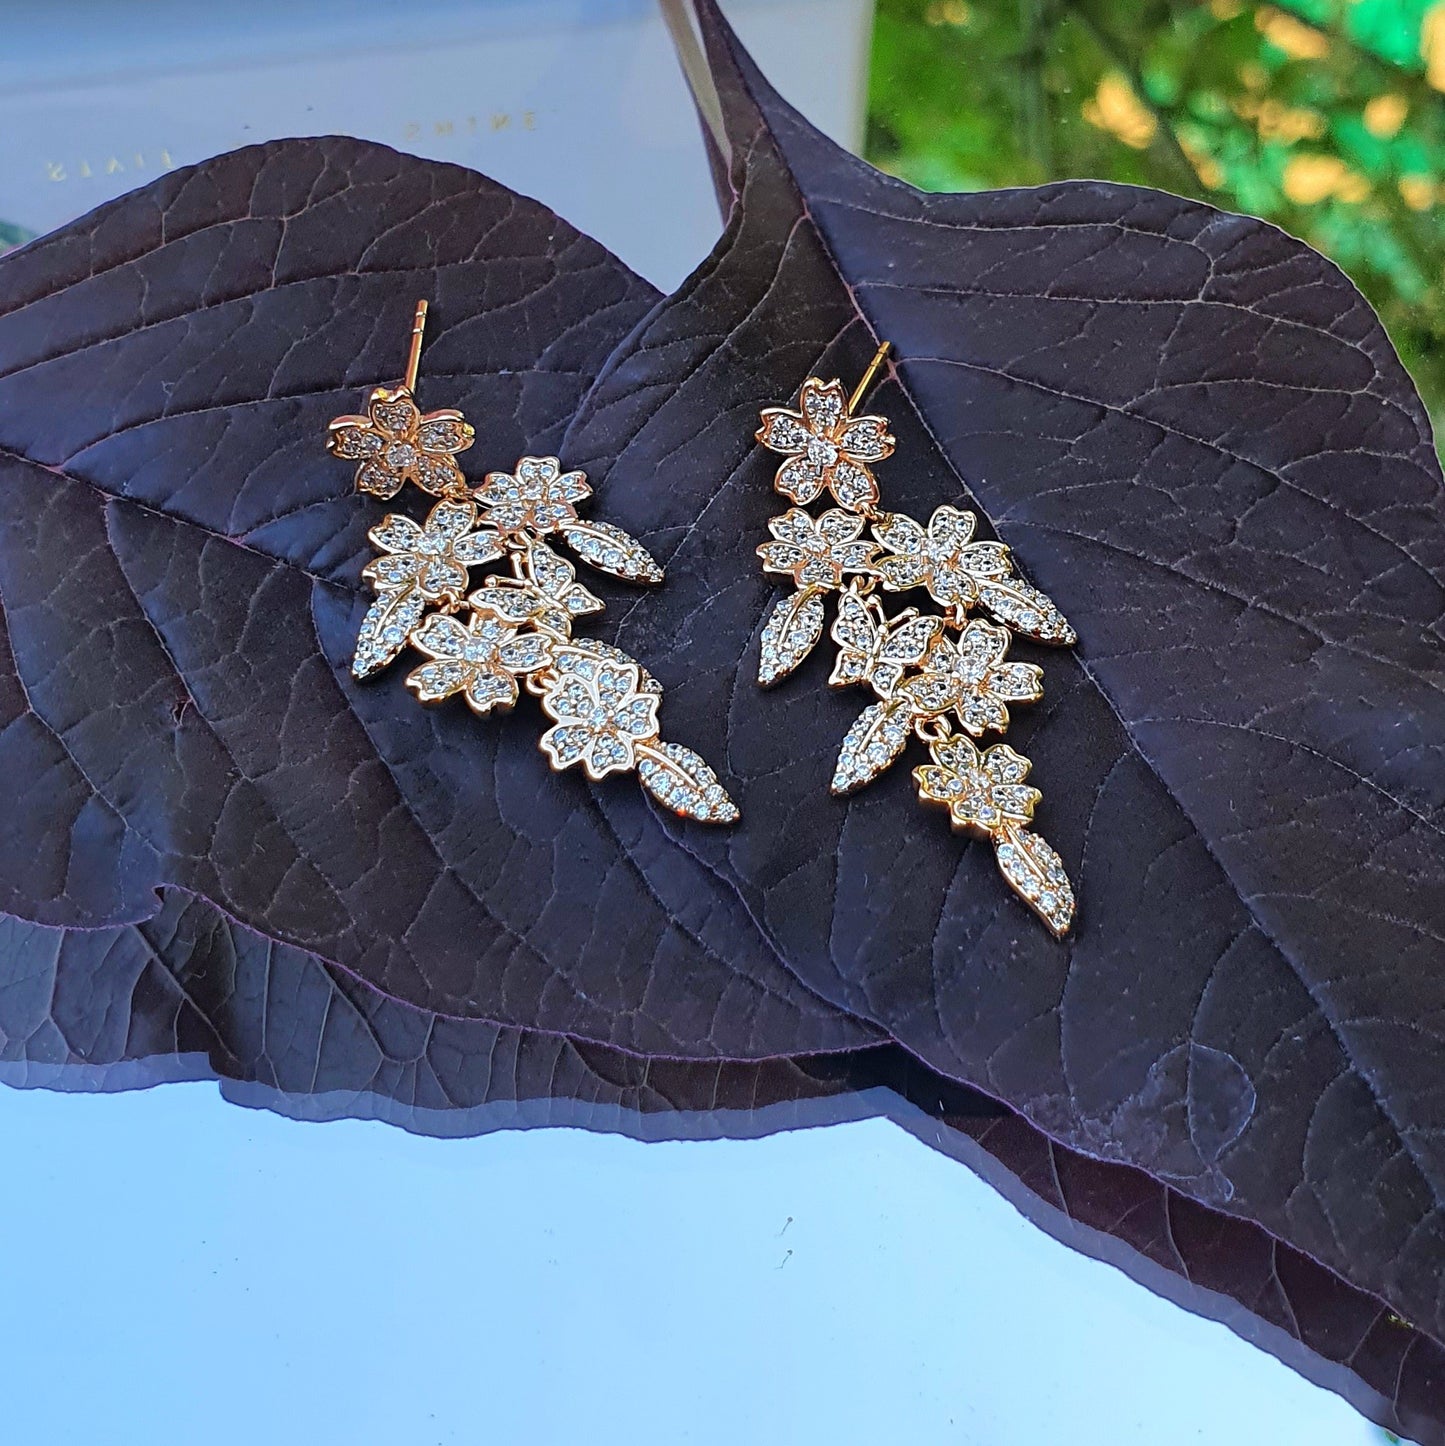 Beautiful Gold Floral Earring